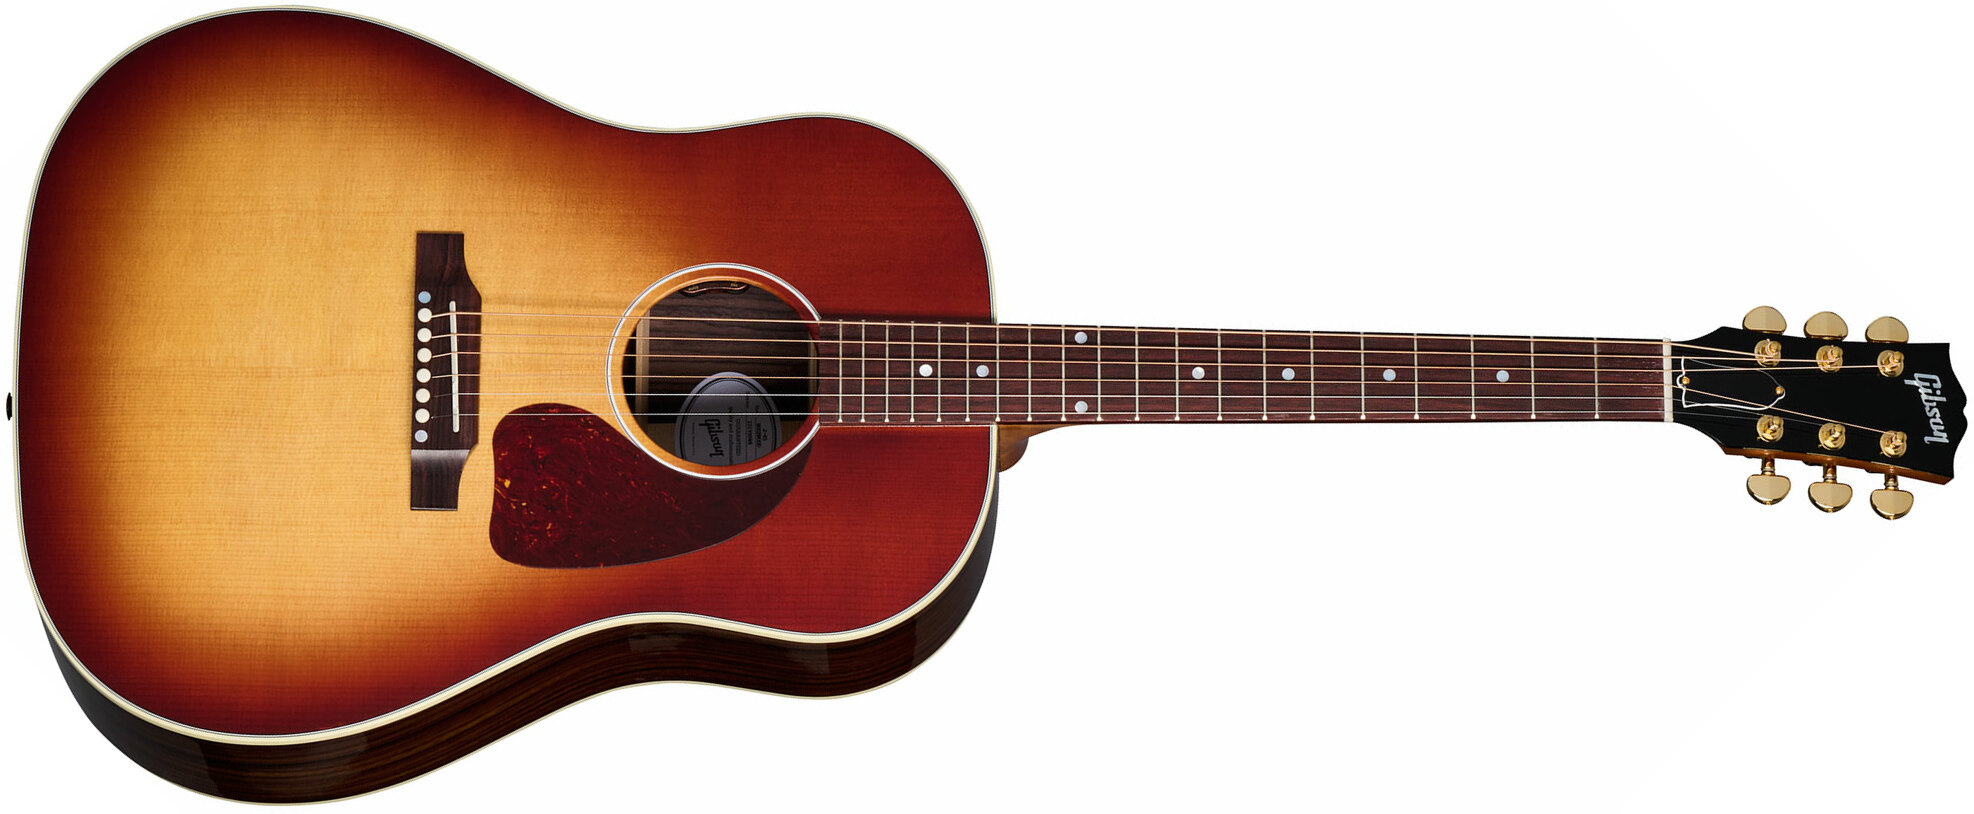 Gibson J-45 Standard Rosewood Dreadnought Epicea Acajou Rw - Rosewood Burst - Electro acoustic guitar - Main picture